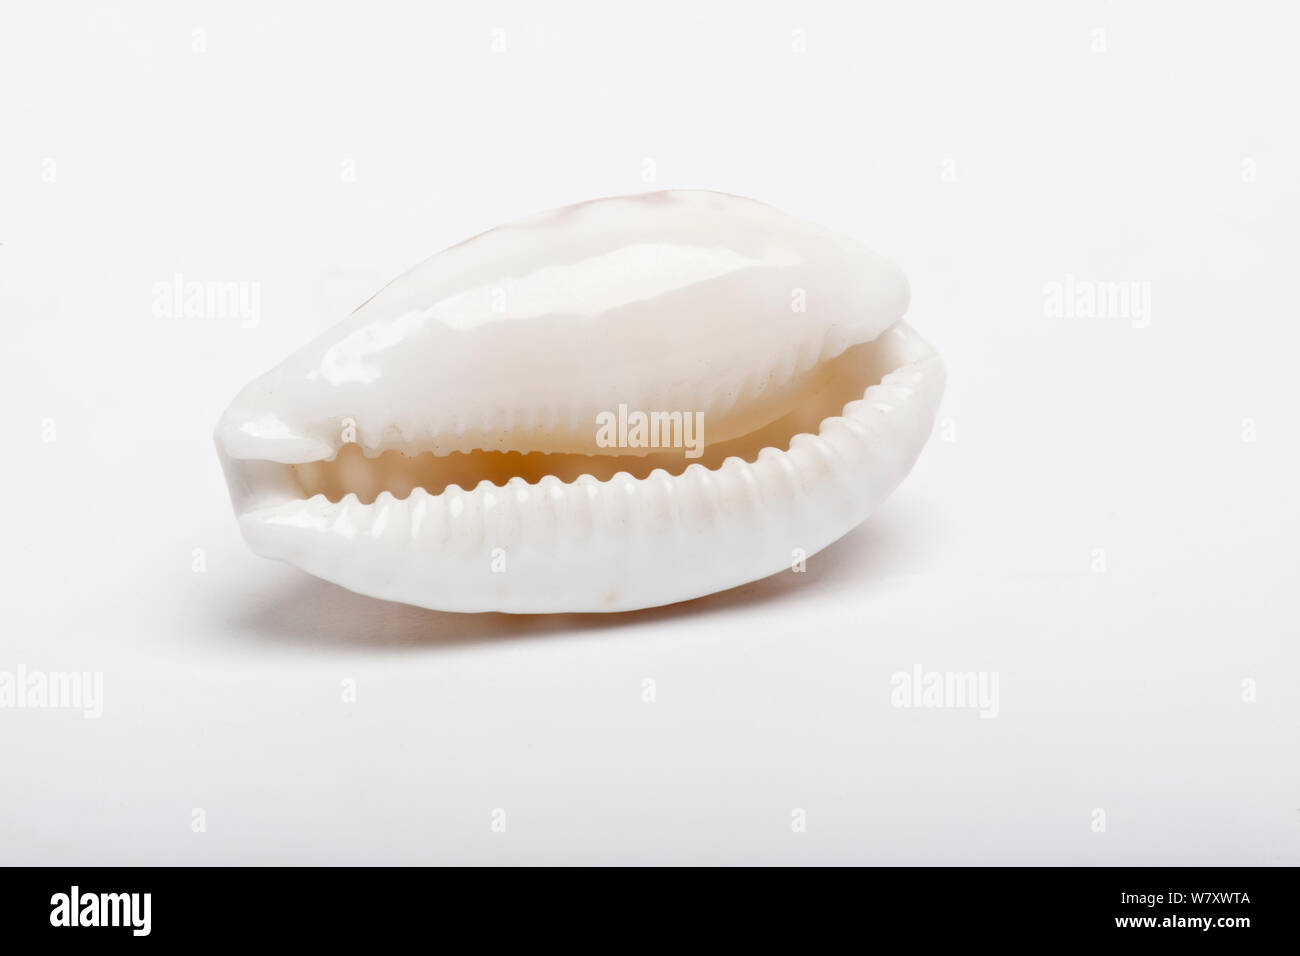 Tan and white cowrie (Cribrarula cribraria) shell, showing aperture, on white background. Stock Photo